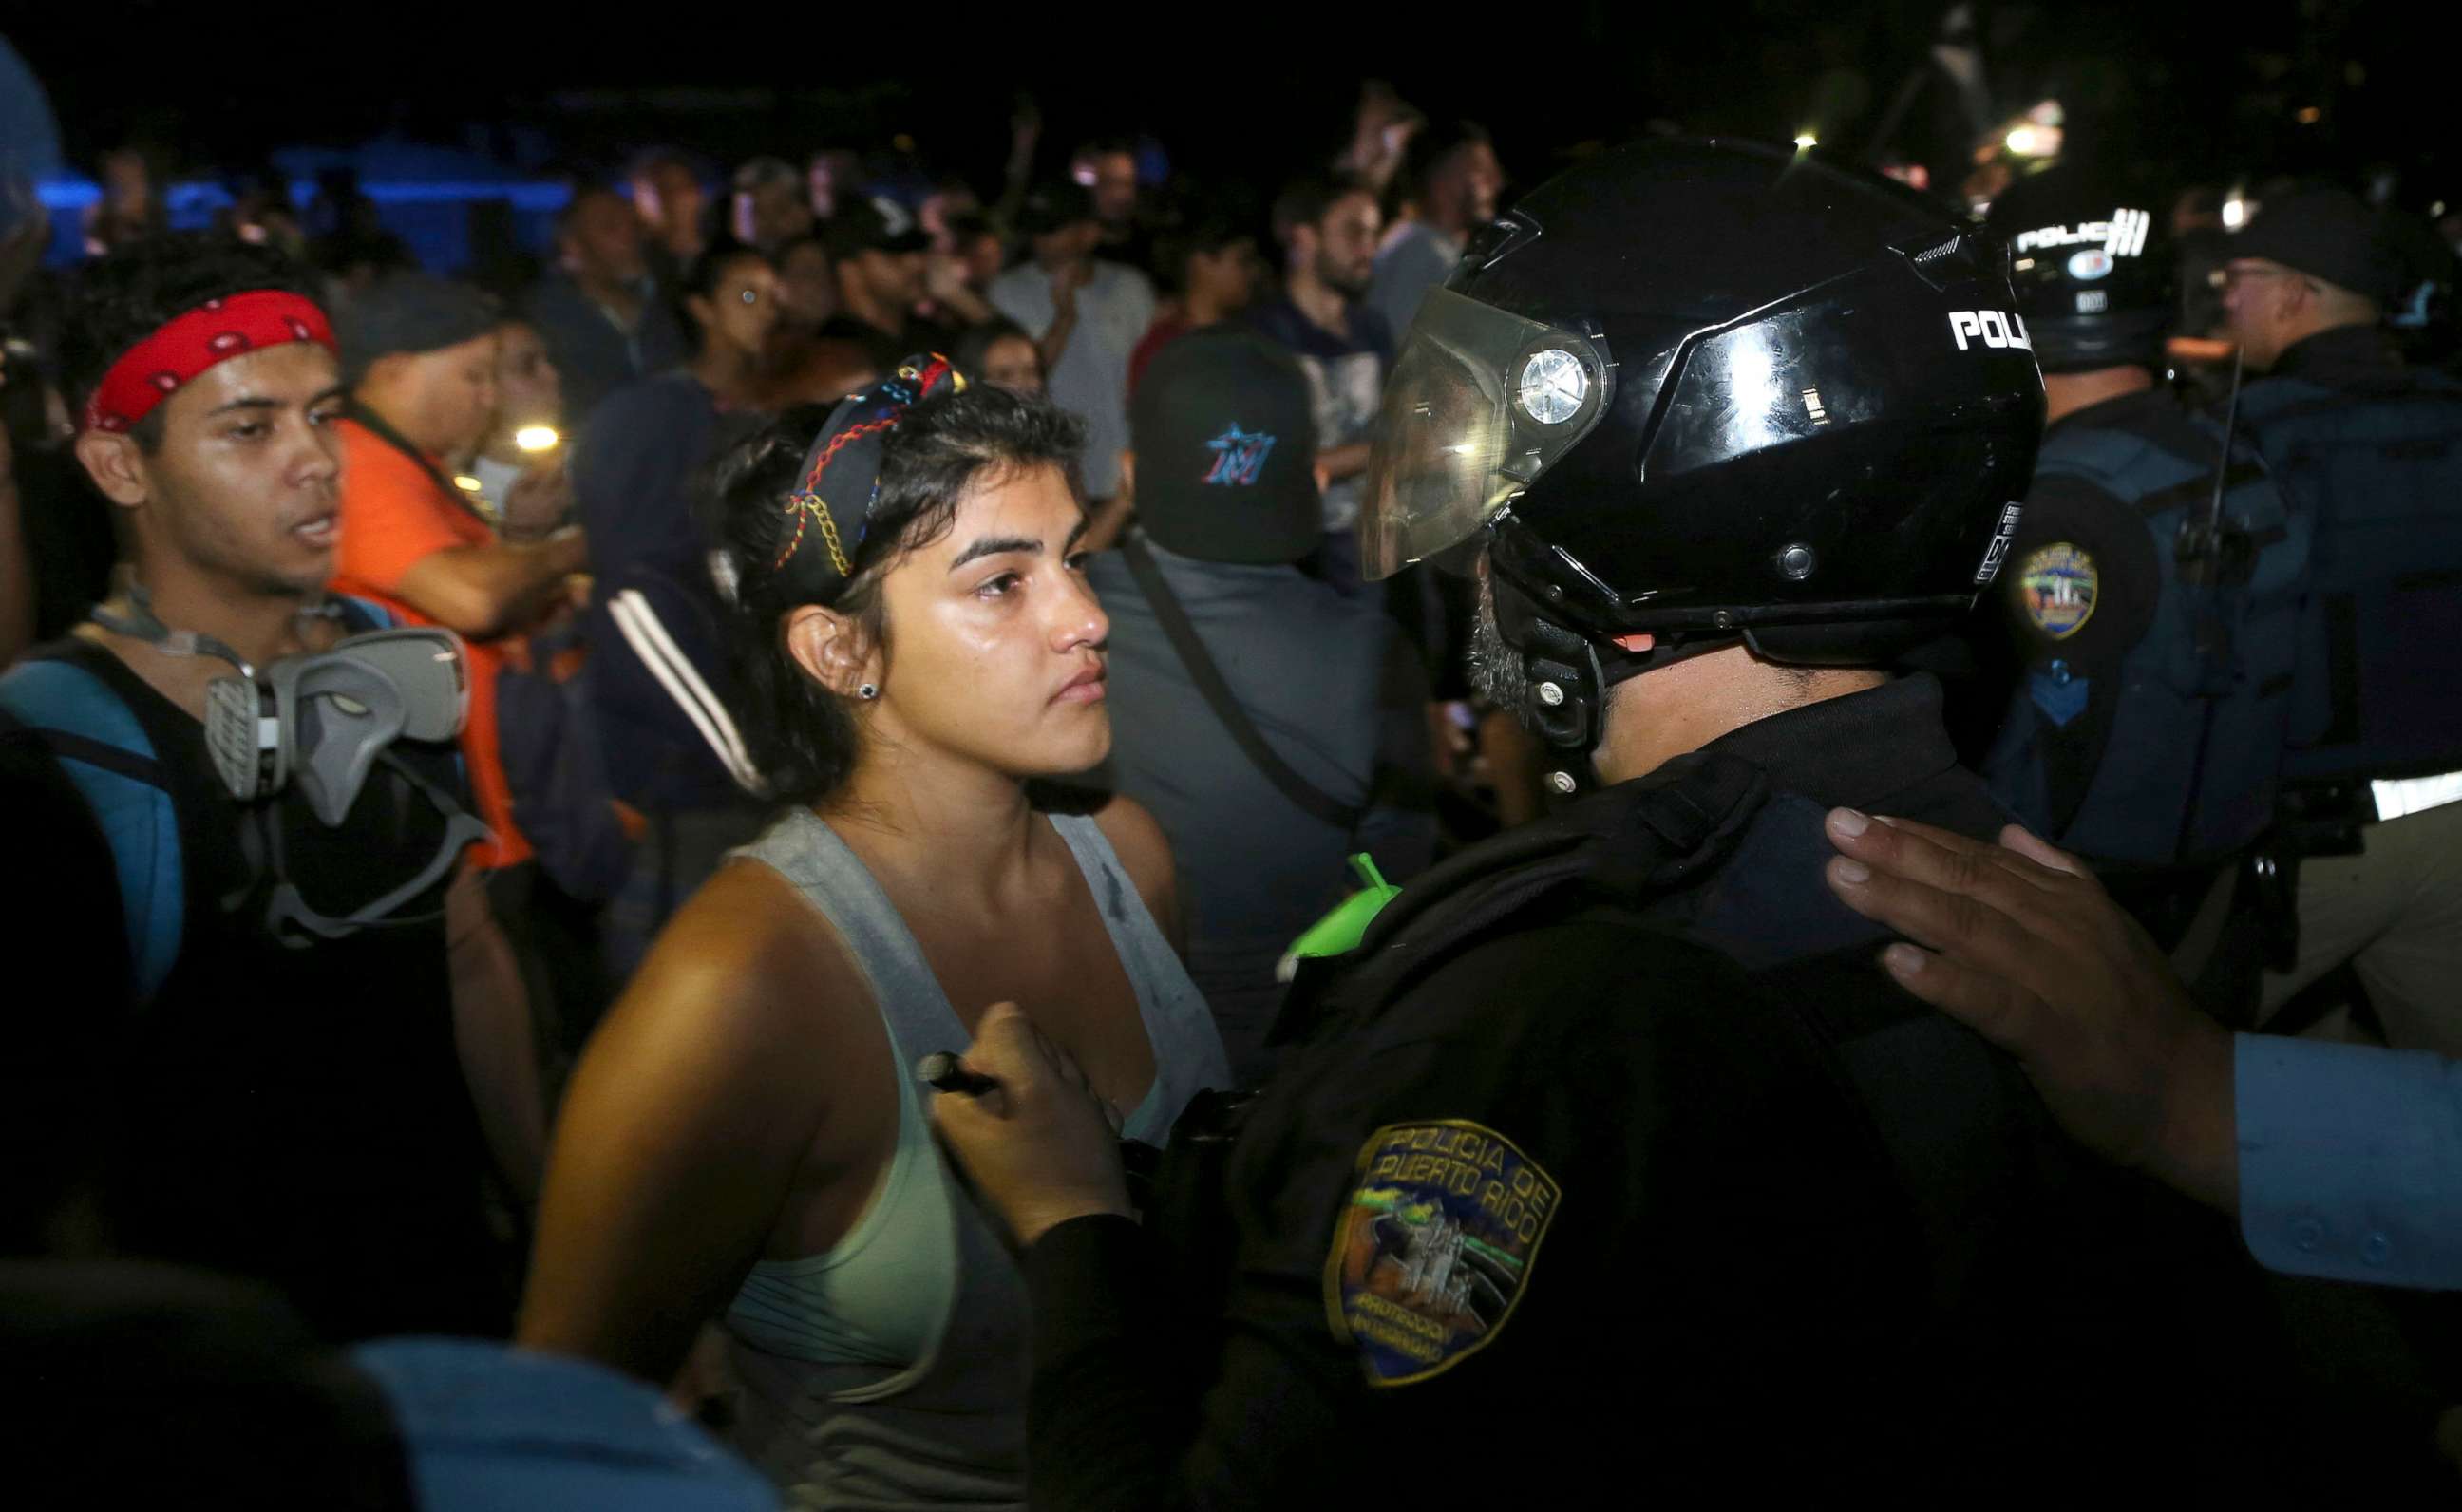 PHOTO: A protester confronts a police officer who is part of a battalion blocking the gate of the Yolanda Guerrero Cultural Center in Guaynabo, Puerto Rico, July 21, 2019.